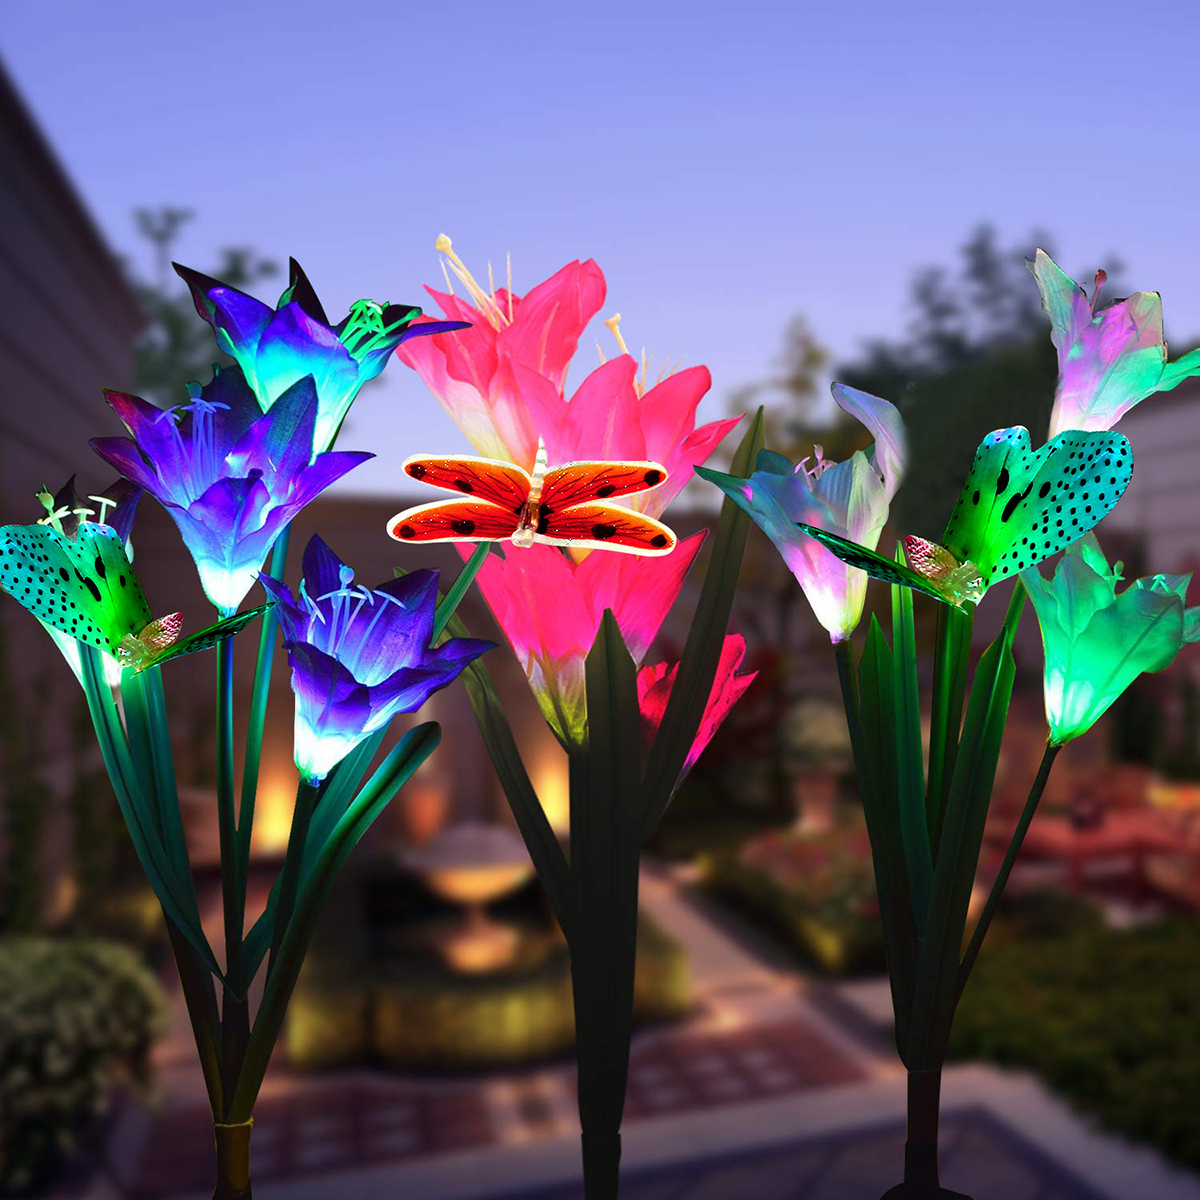 

2Pcs/Set Waterproof LED Solar Stake Lily Flower Light Outdoor Garden Lawn Decorations